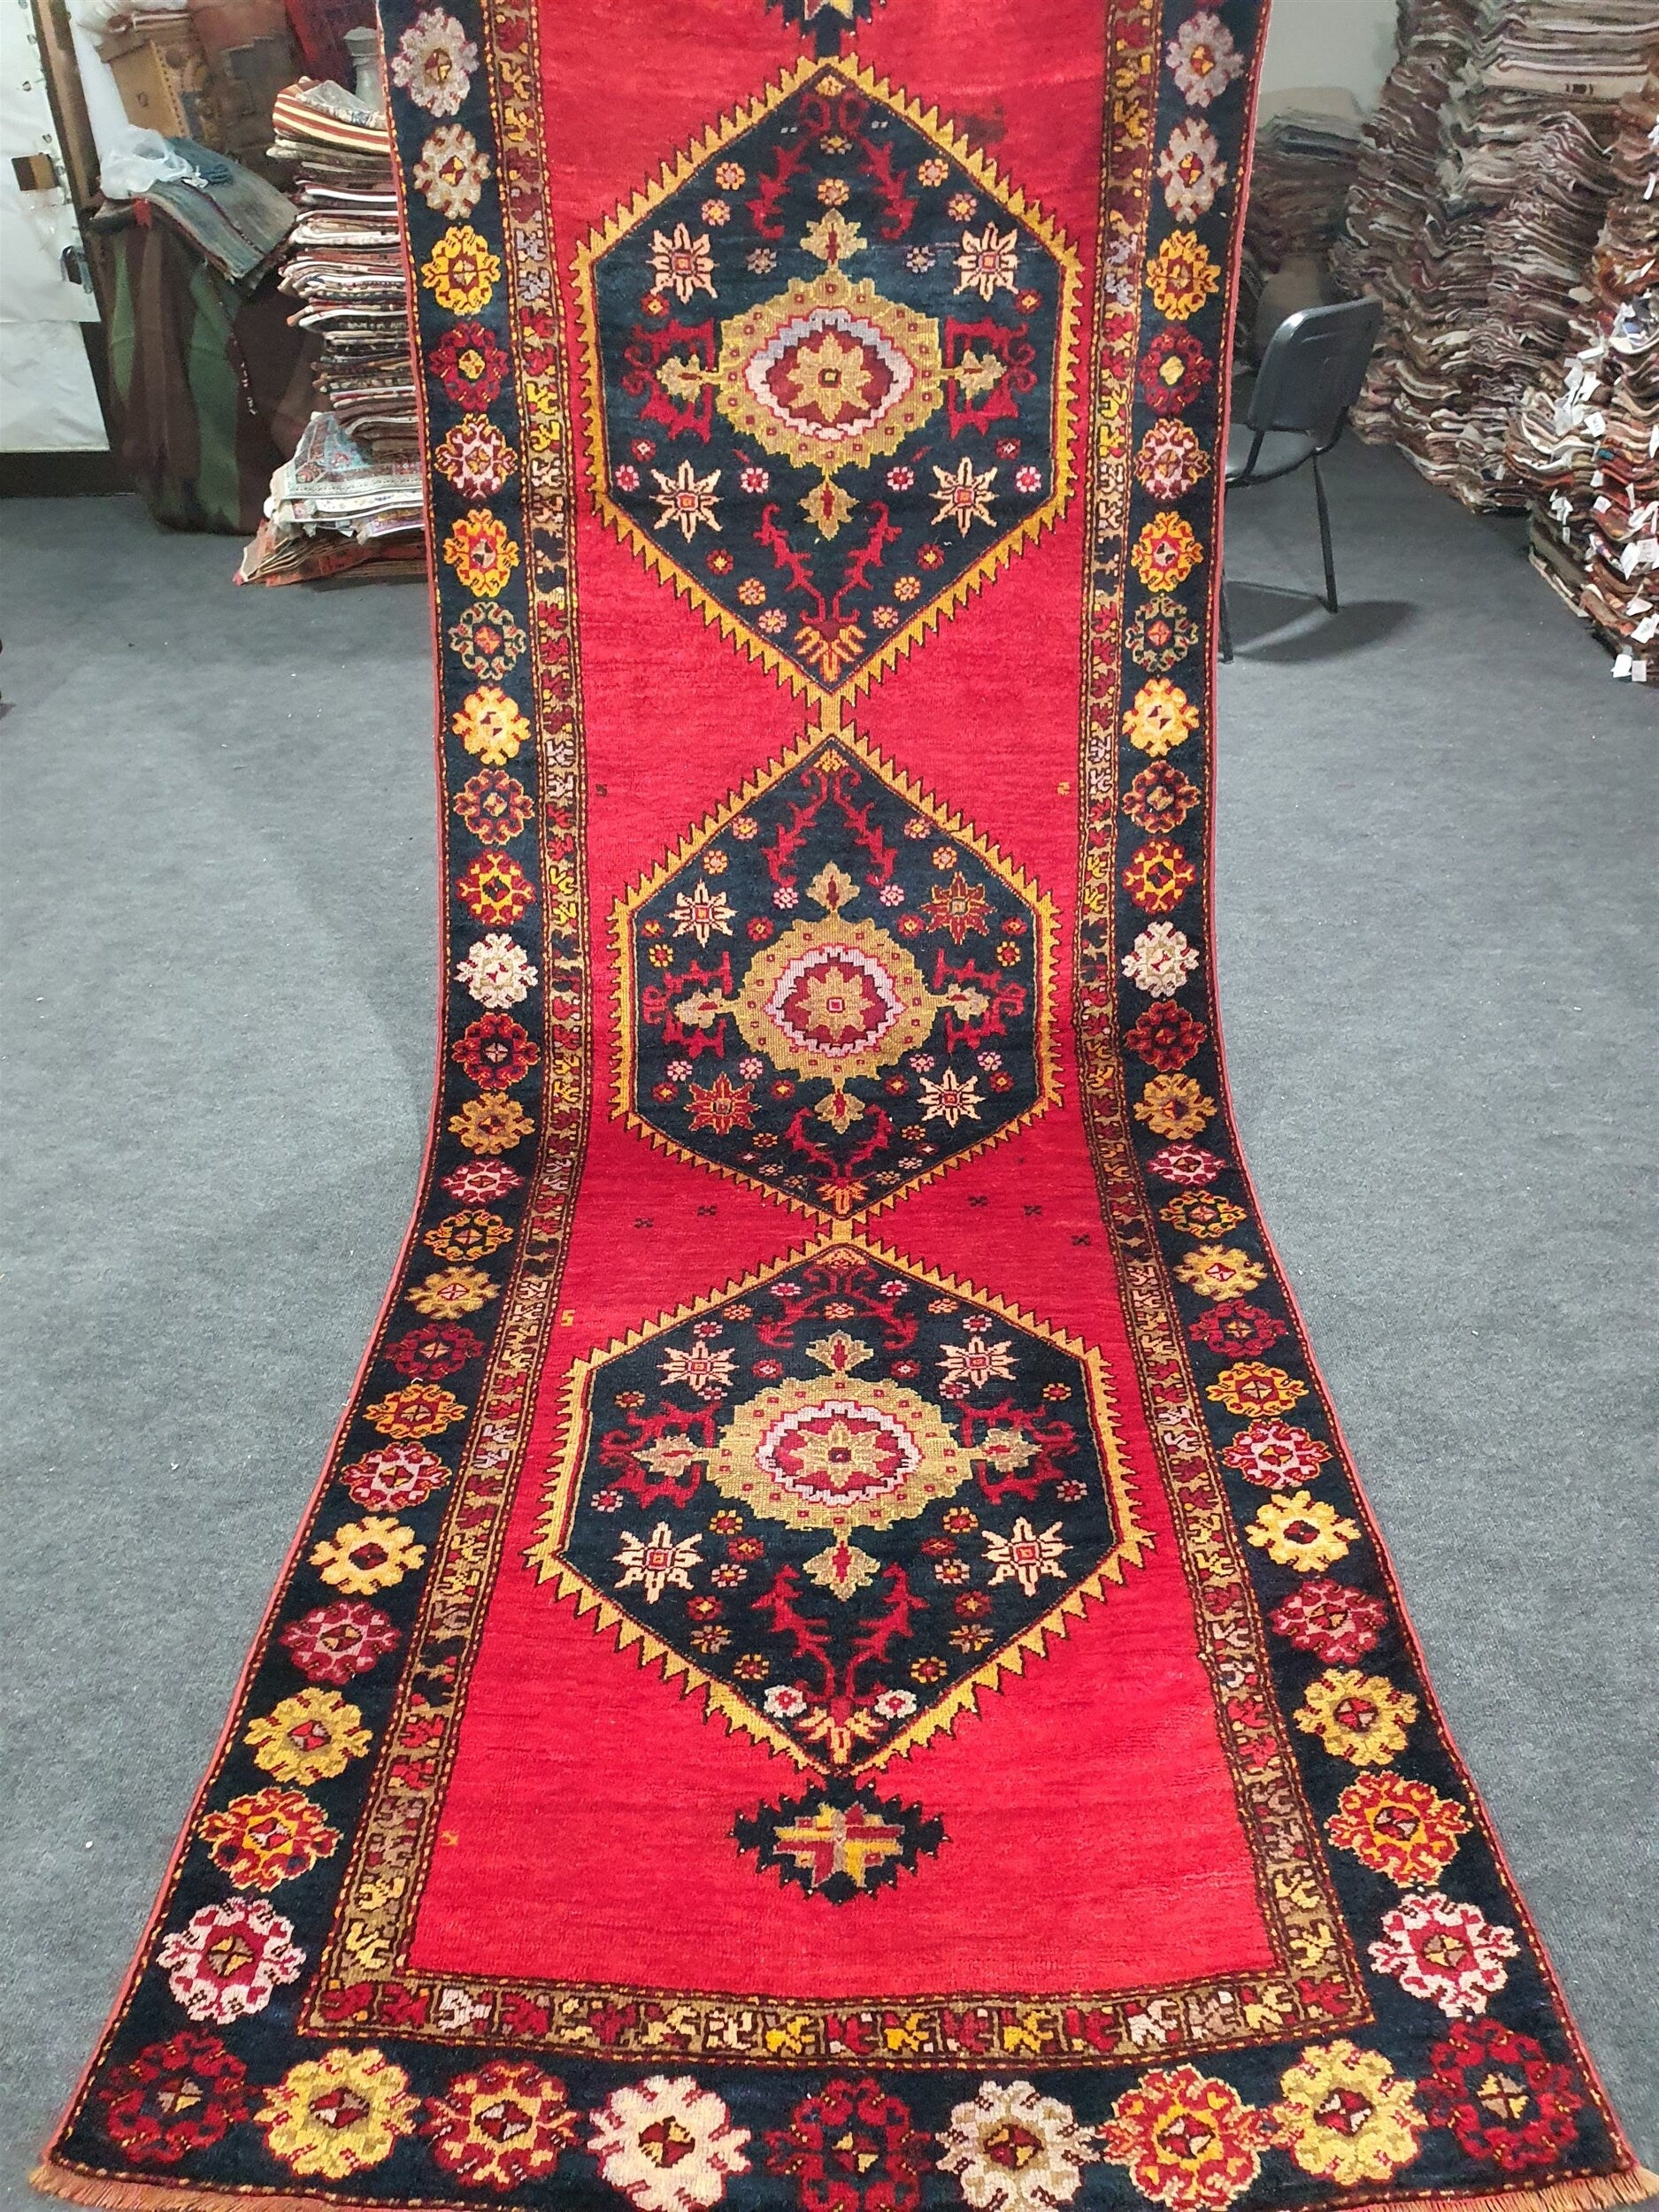 Persian Hallway Runner 11 x 3 ft Turkish Natural Wool Rug, Red with Blue and Brown Central Floral Medallions and Border Entry Corridor Rug